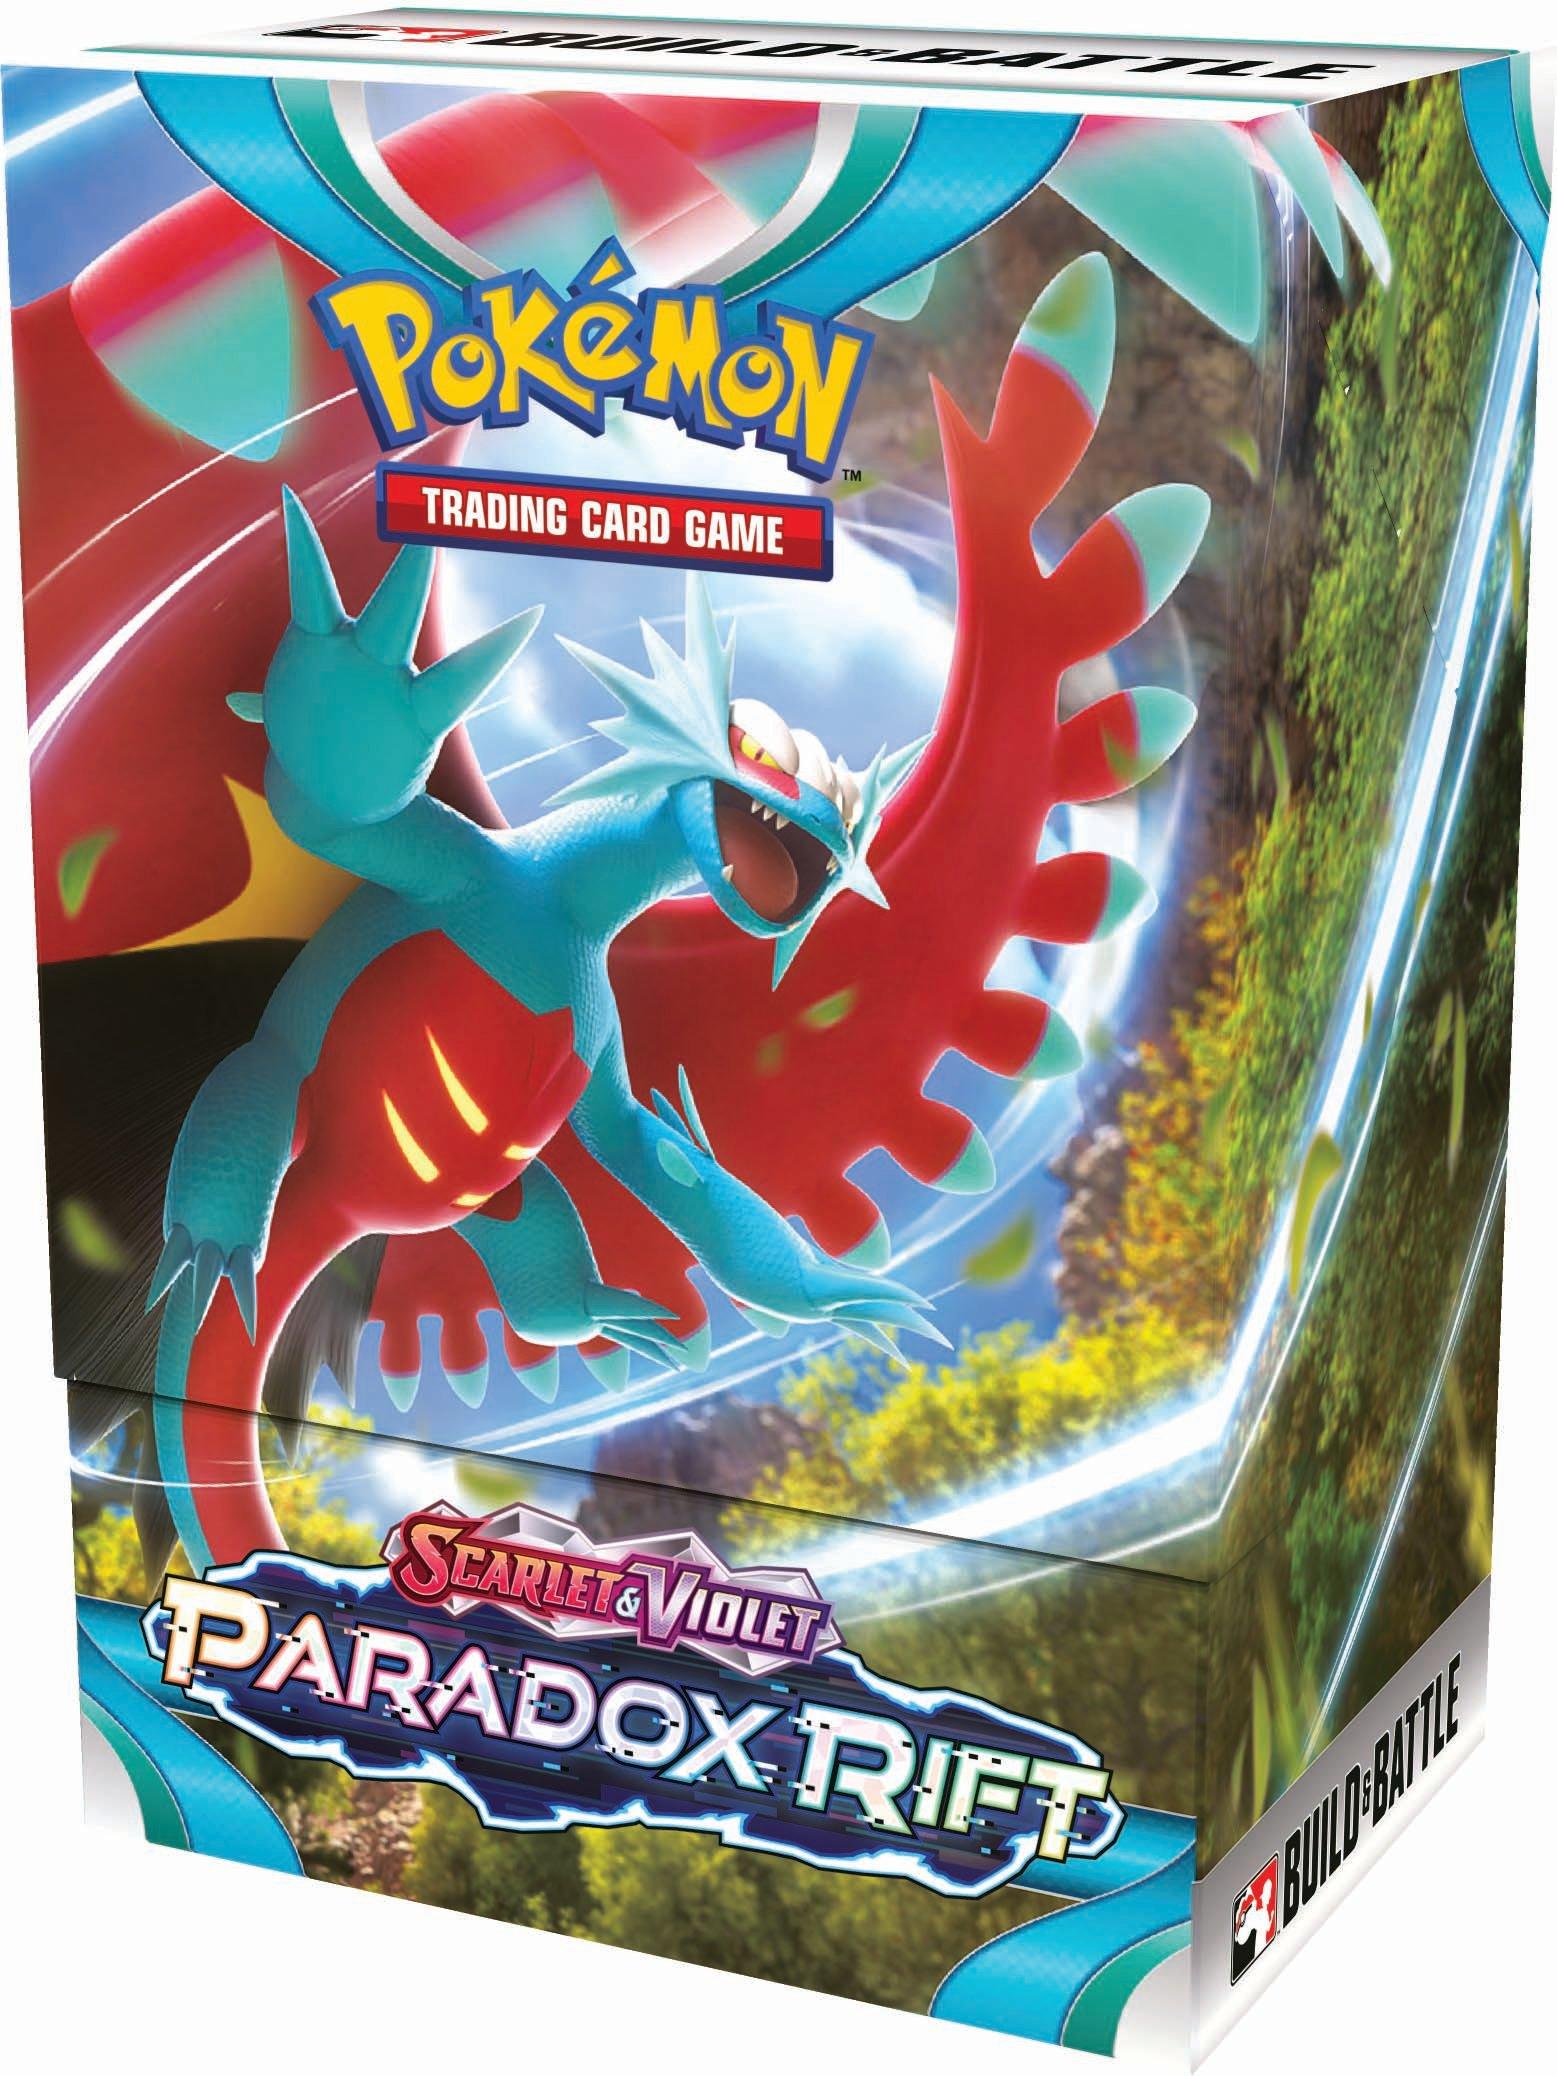  Pokémon TCG: Paradox Powers ex Special Collection -   Exclusive : Toys & Games